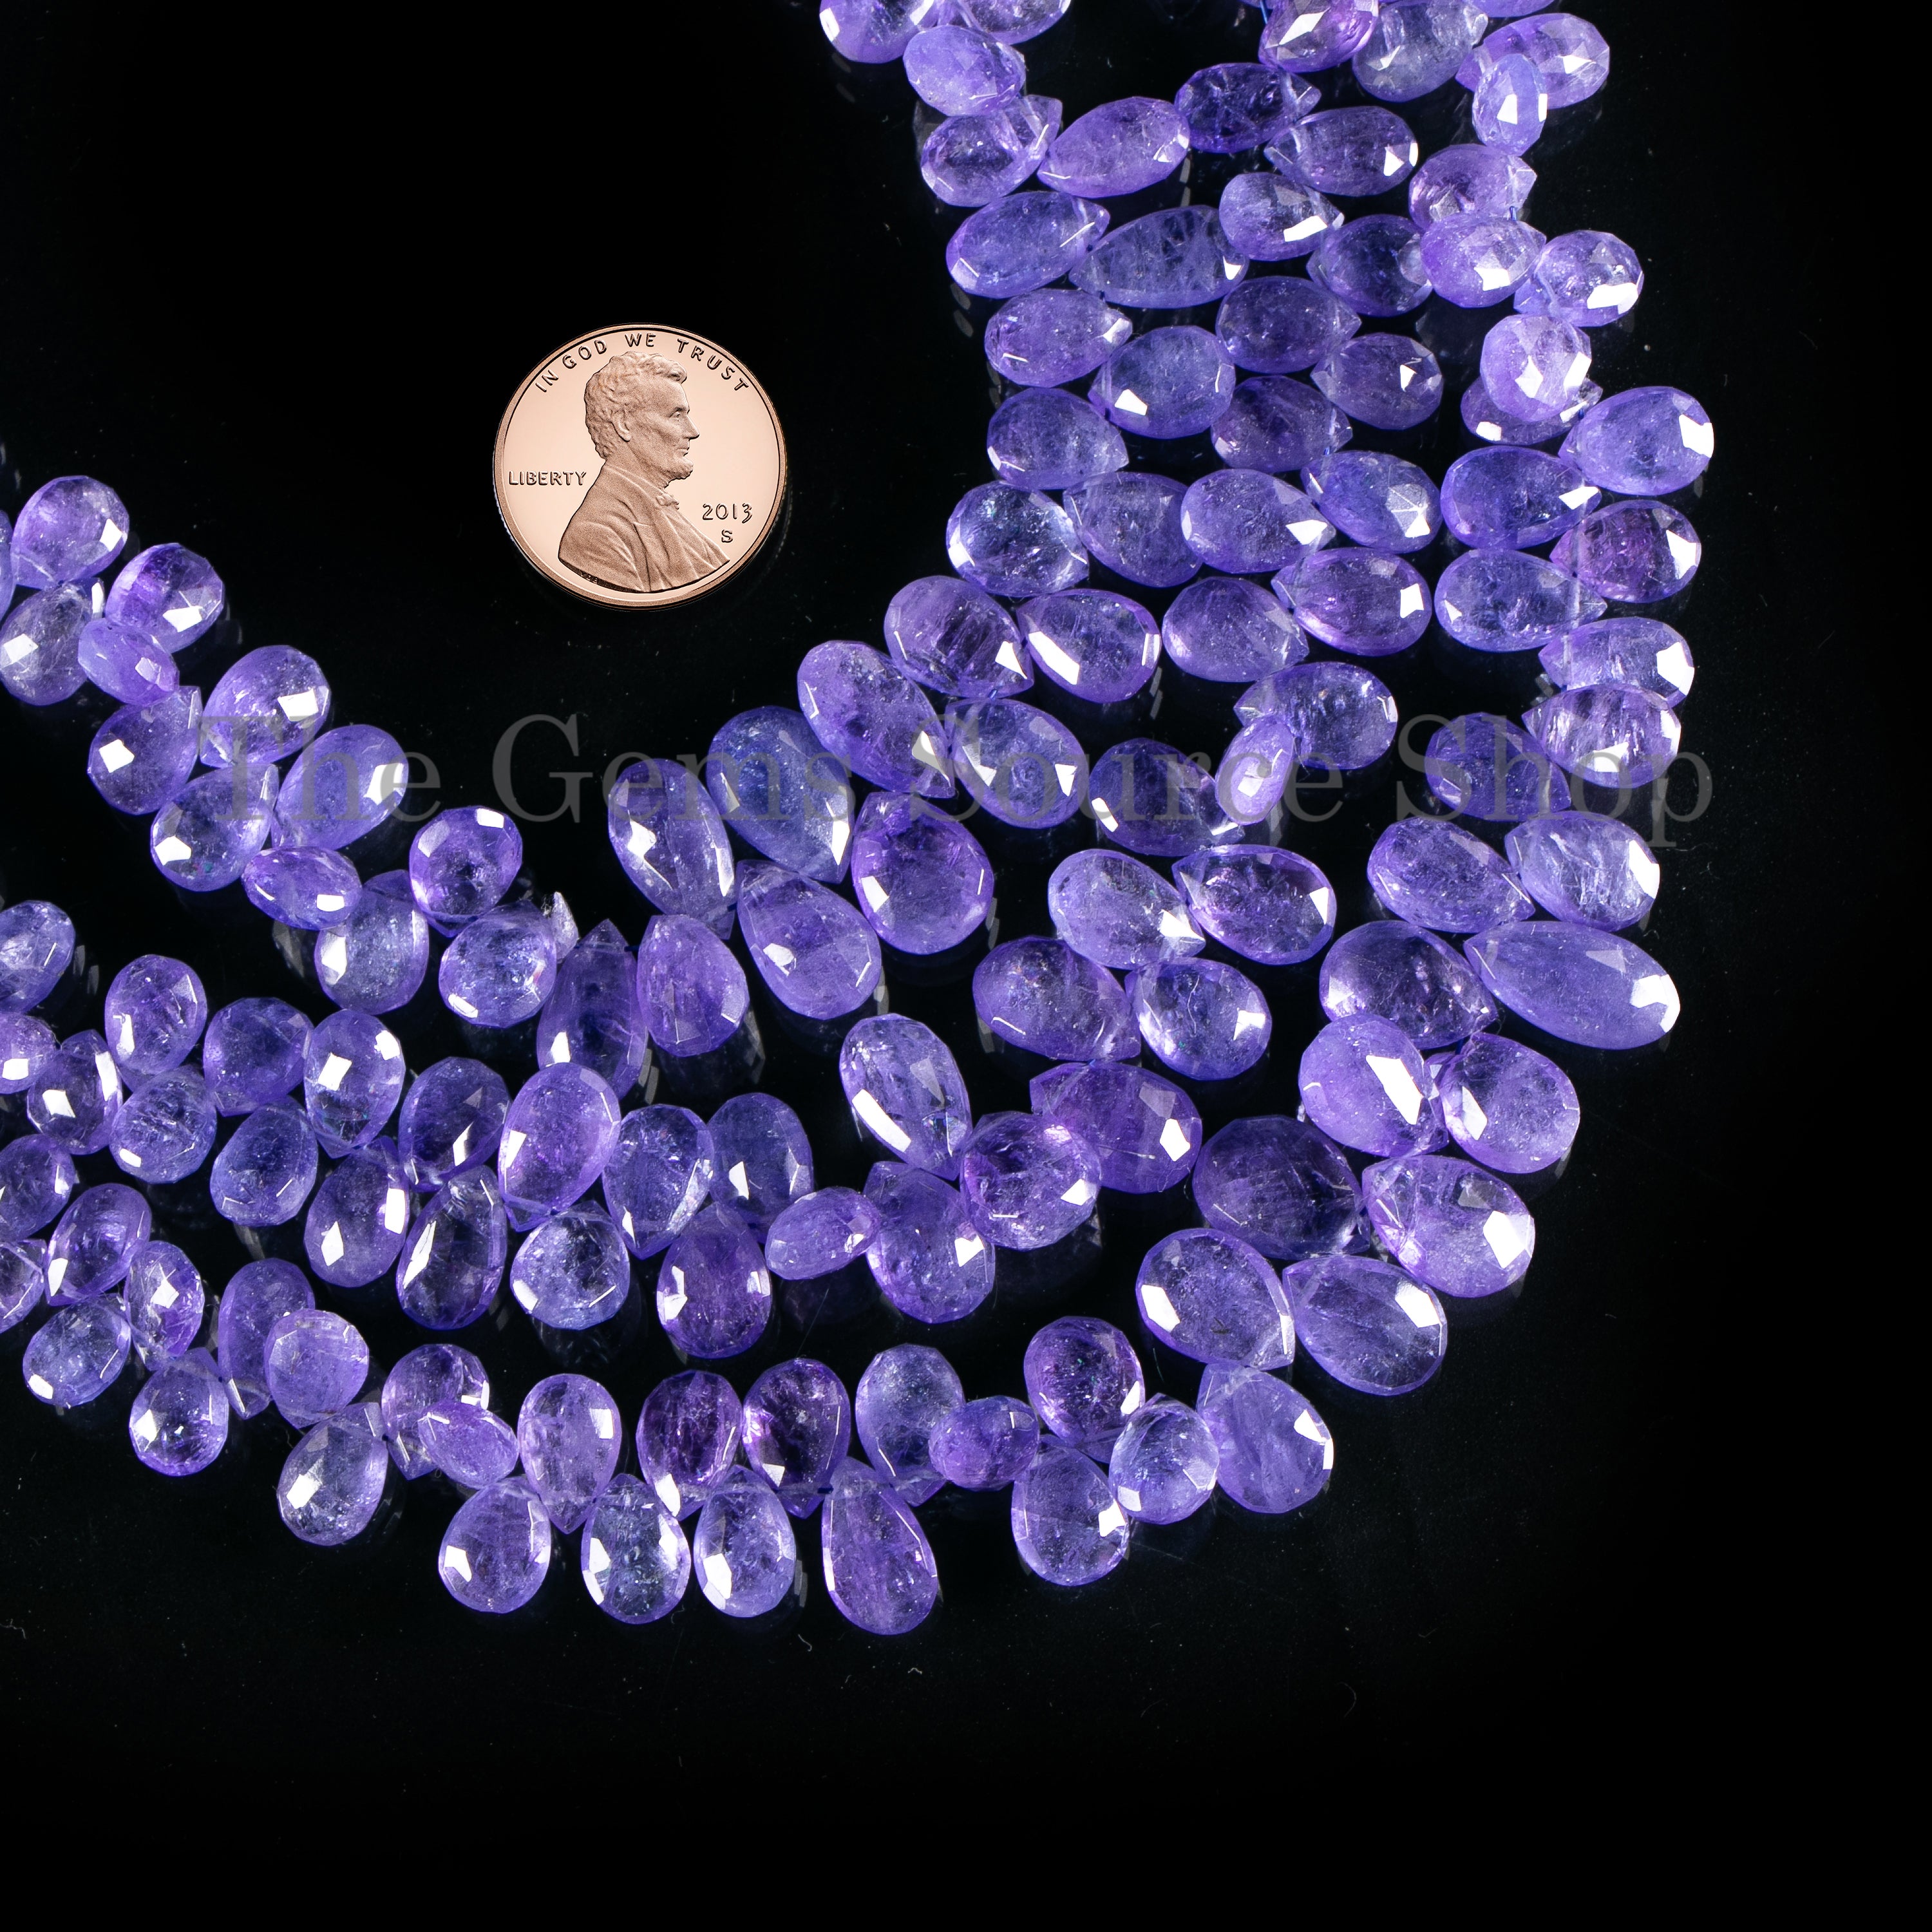 4.5x6-7x12 mm Tanzanite Faceted Pear Shape Gemstone Beads TGS-4699